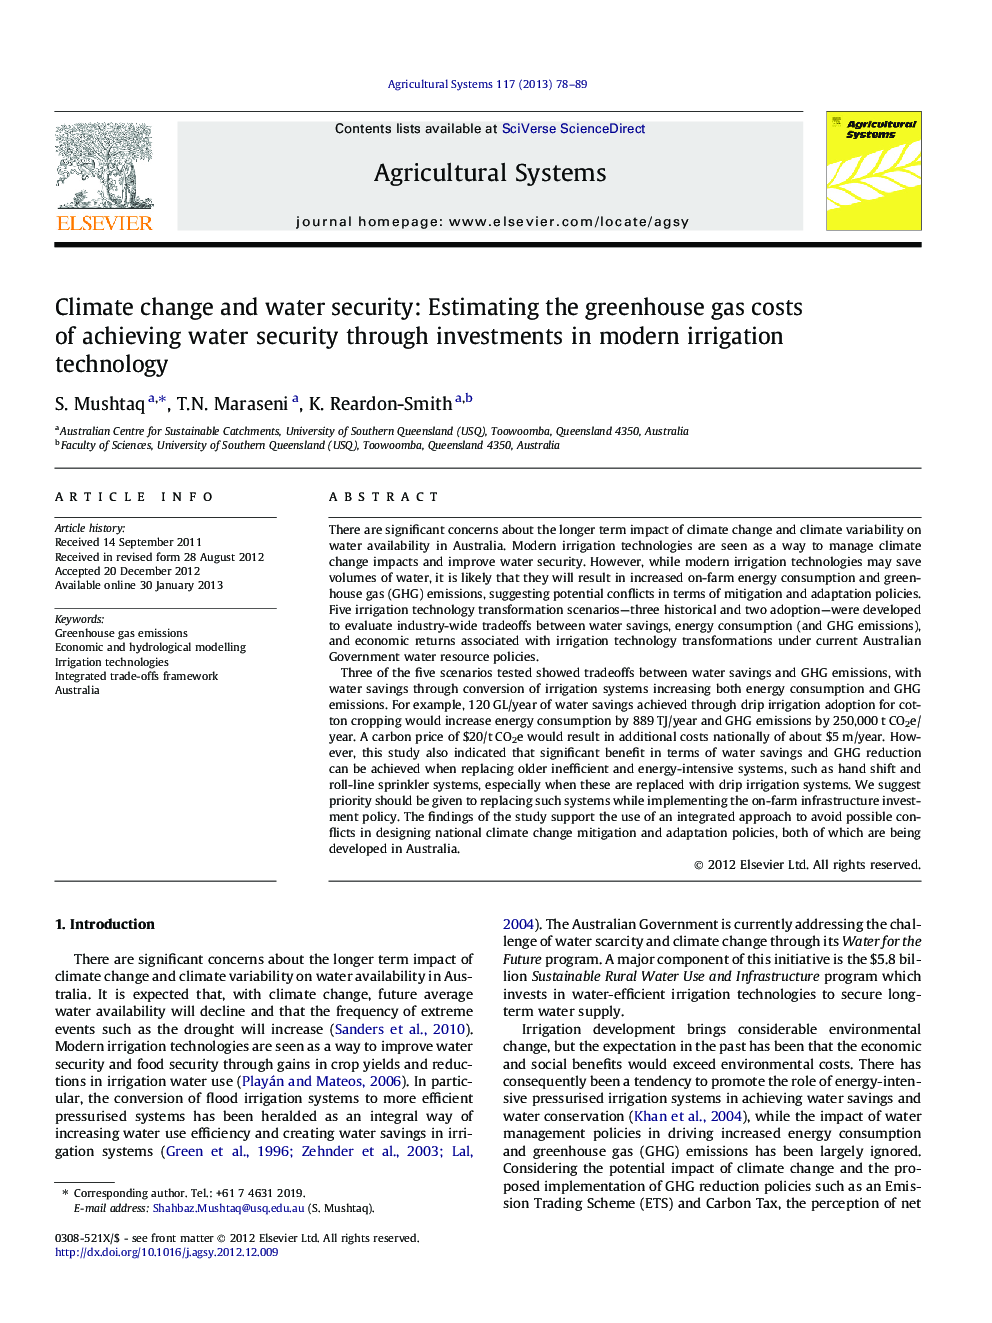 Climate change and water security: Estimating the greenhouse gas costs of achieving water security through investments in modern irrigation technology